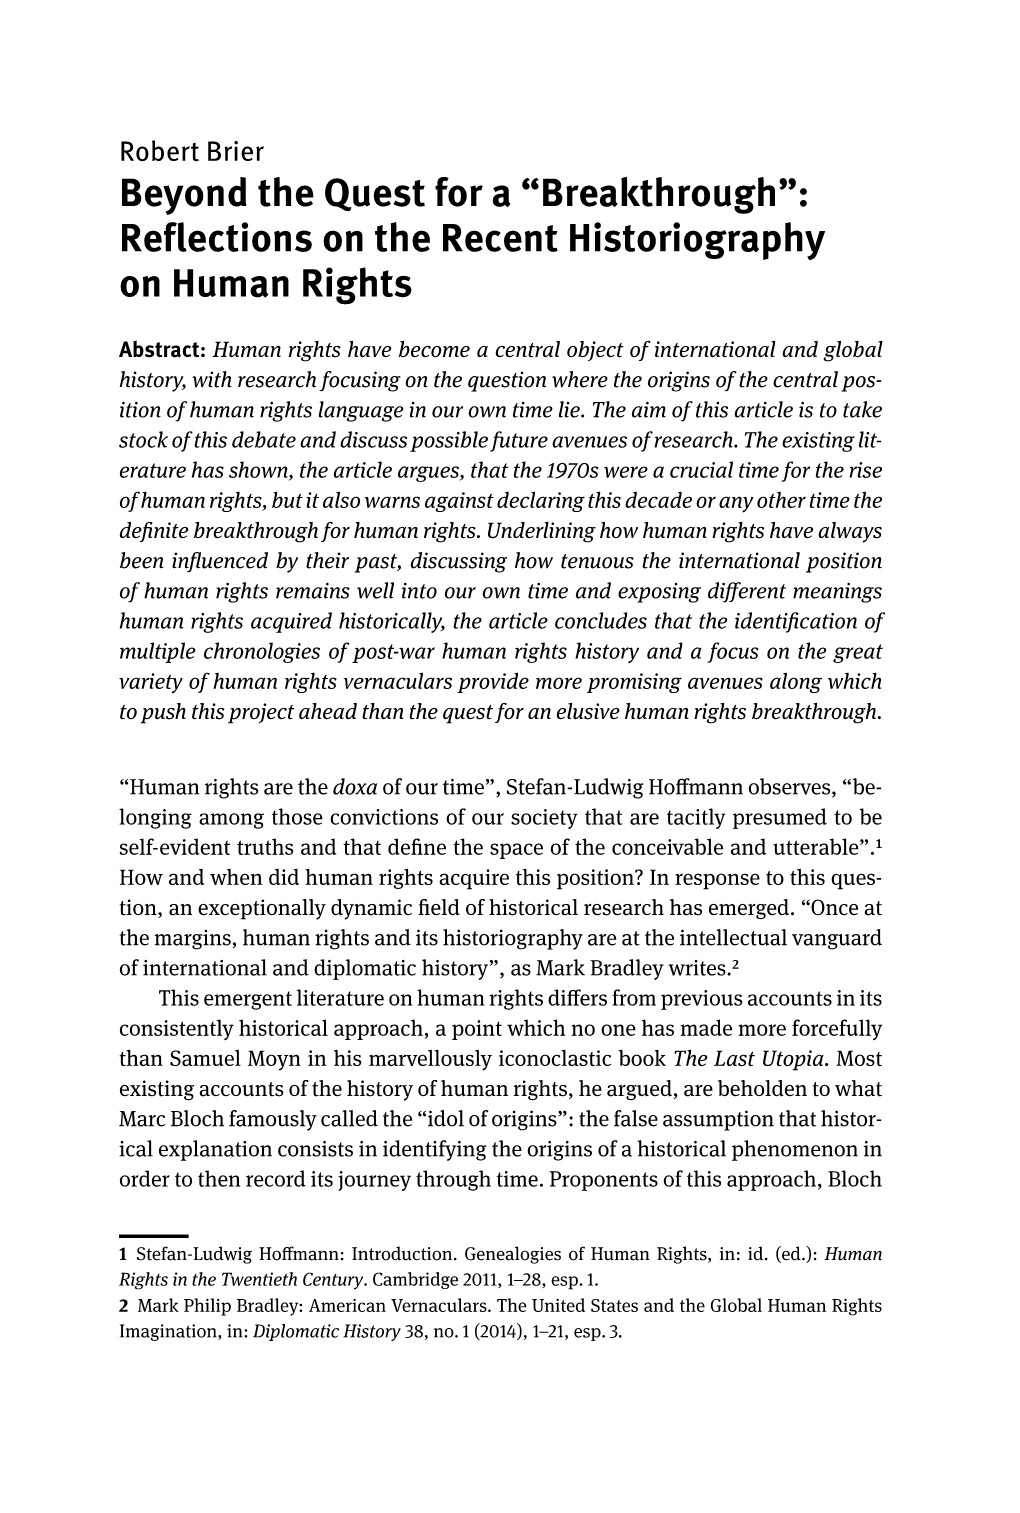 Reflections on the Recent Historiography on Human Rights